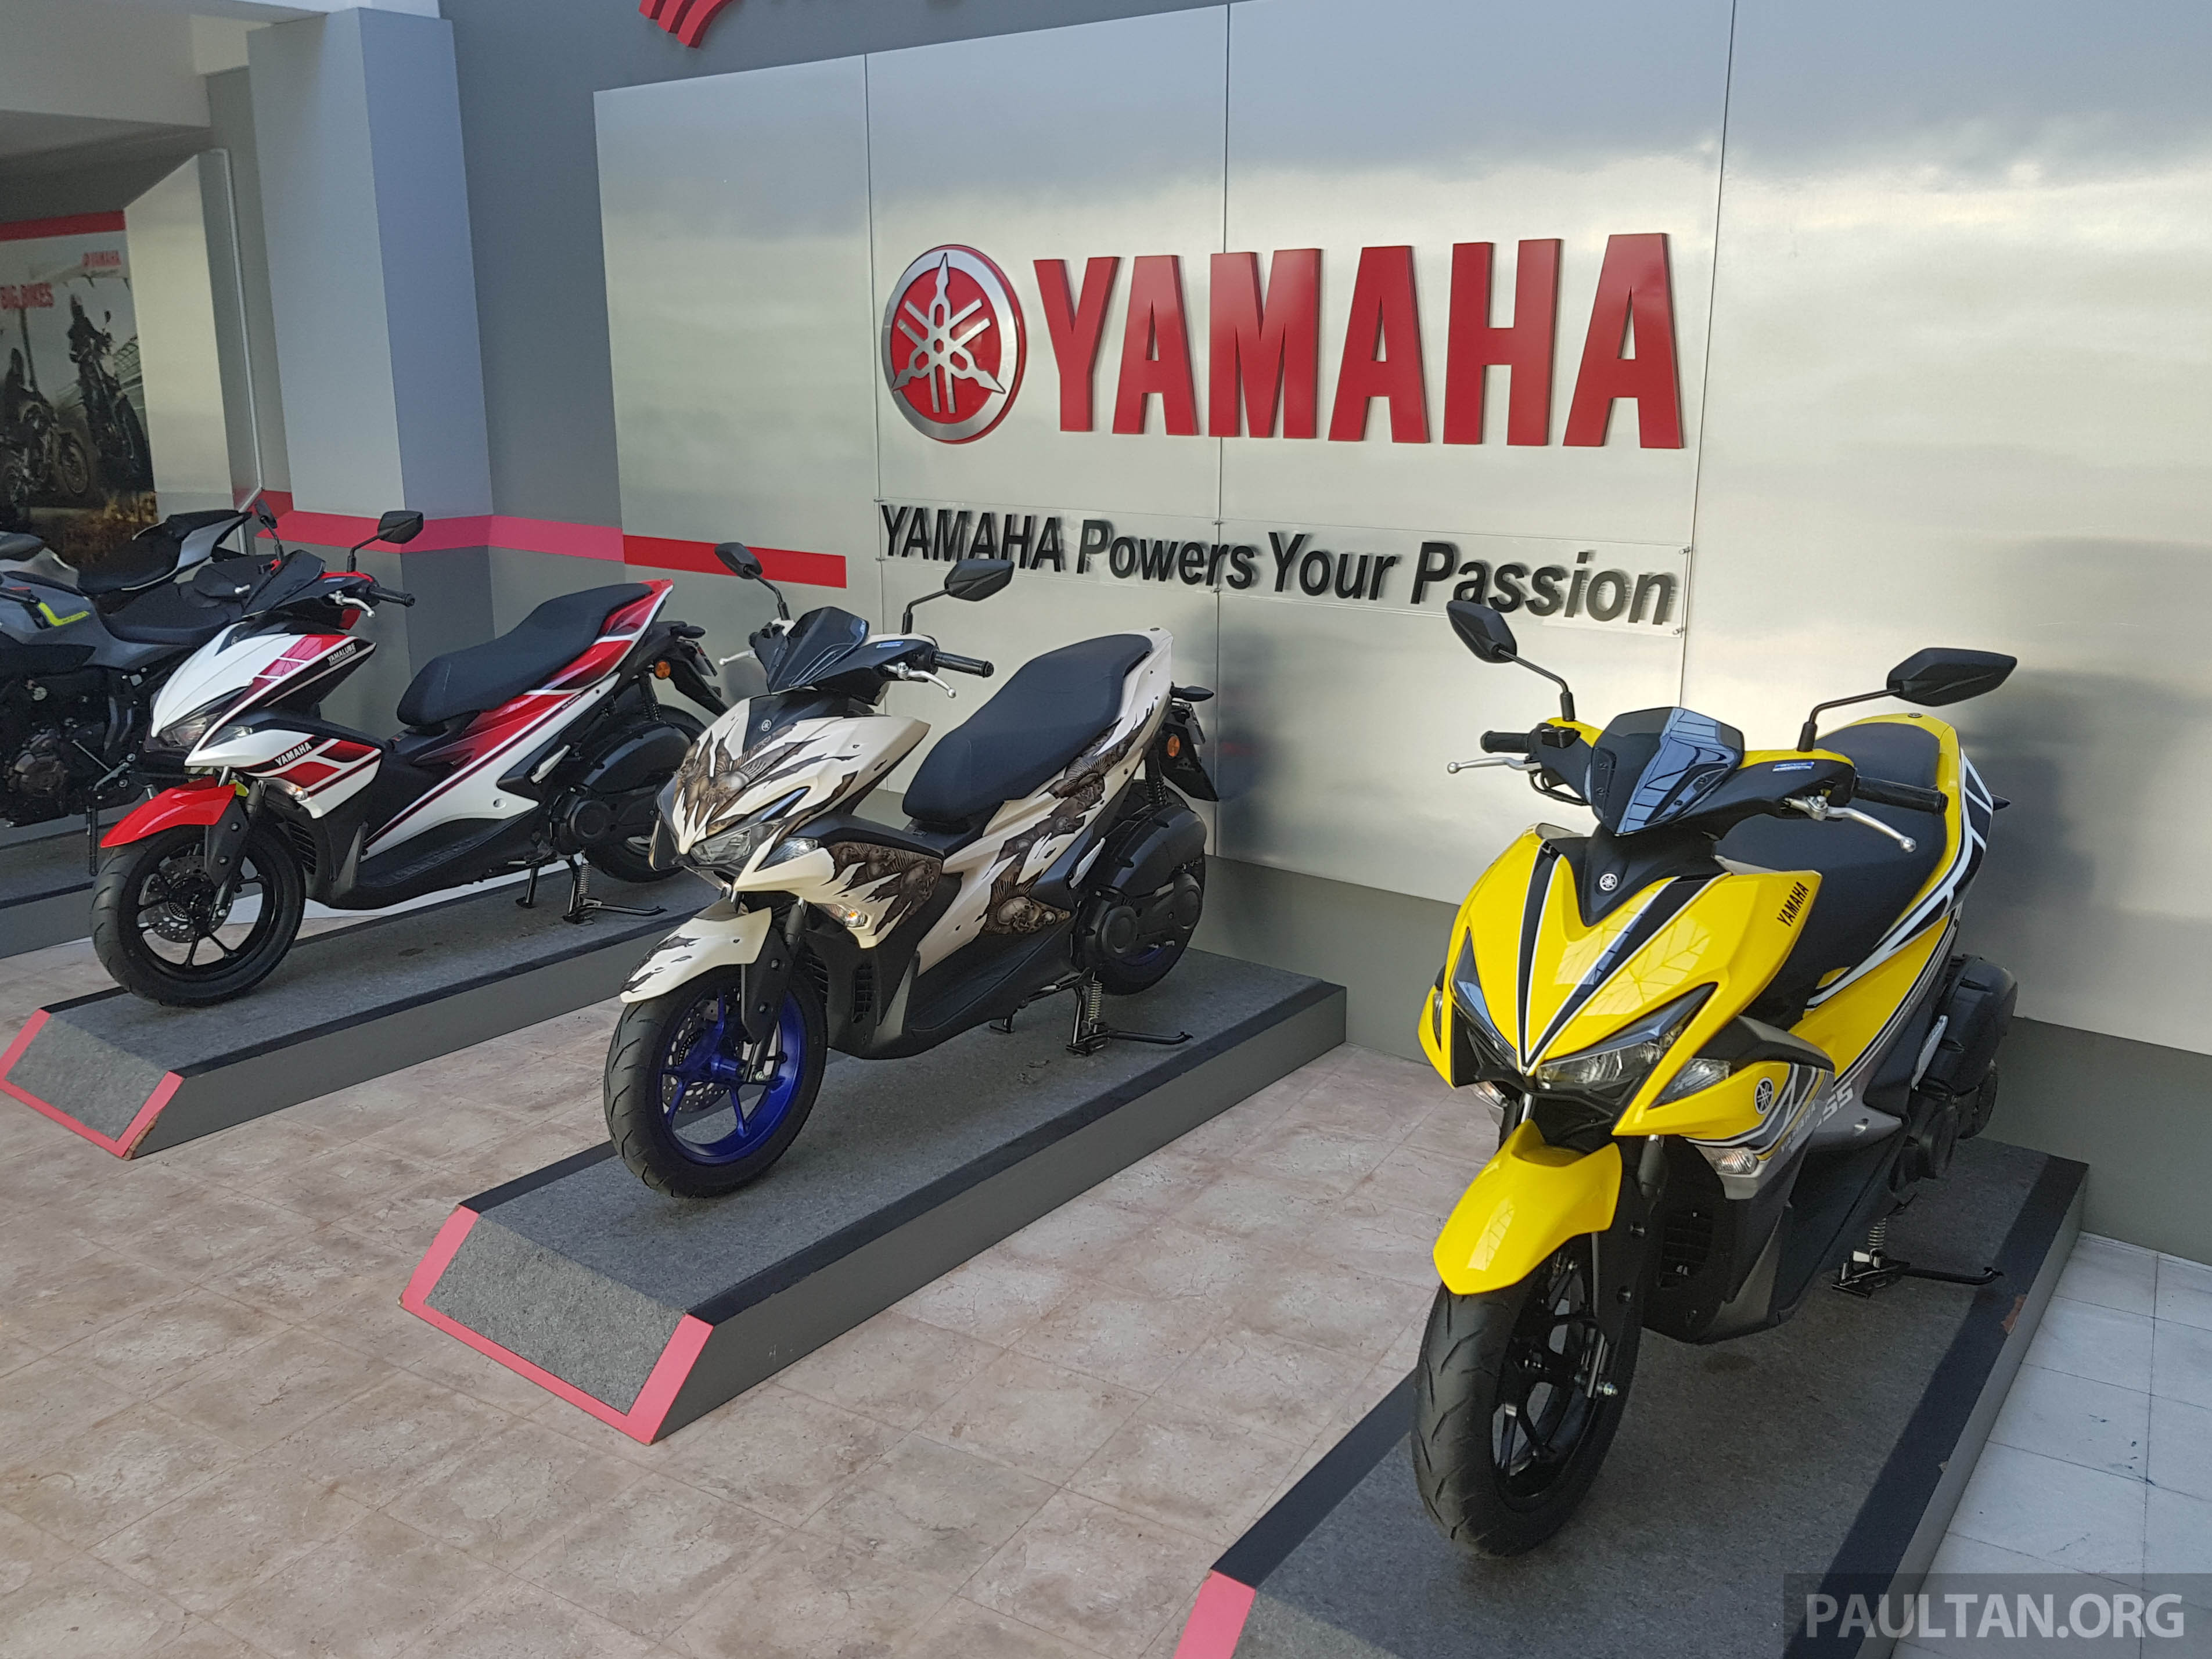 2017 Yamaha NVX specials on display in Shah Alam